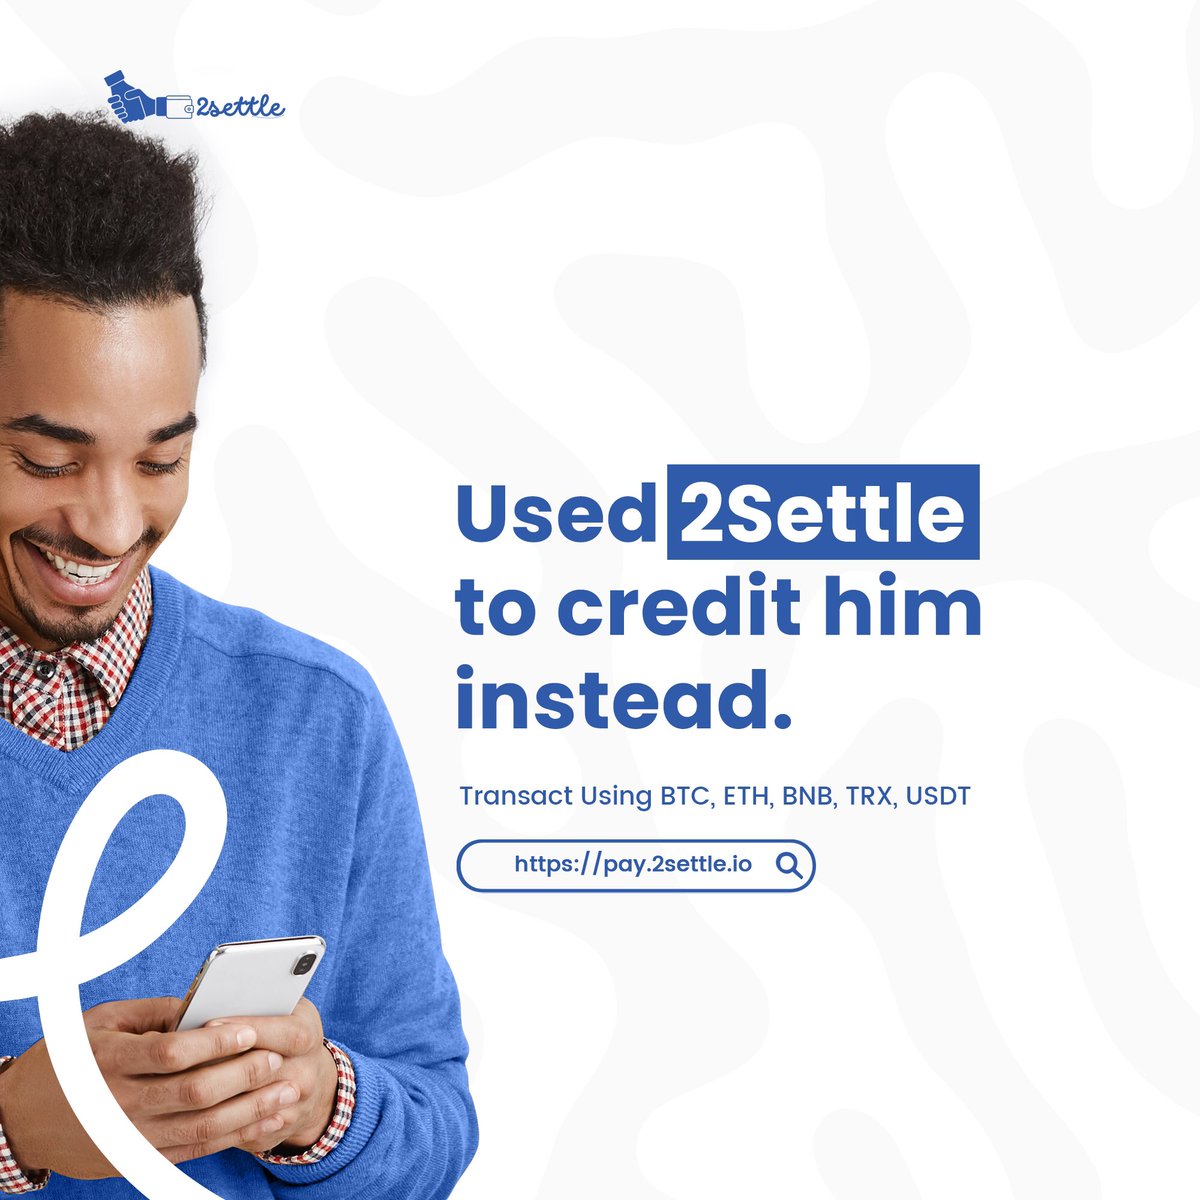 Network issues or not, 2Settle guarantees that your payments are made on time whether you are spending or sending #BTC #ETH #TRX #USDT #BNB or #ZND Chat Wale t.me/SettleHQ_bot to make transactions today.